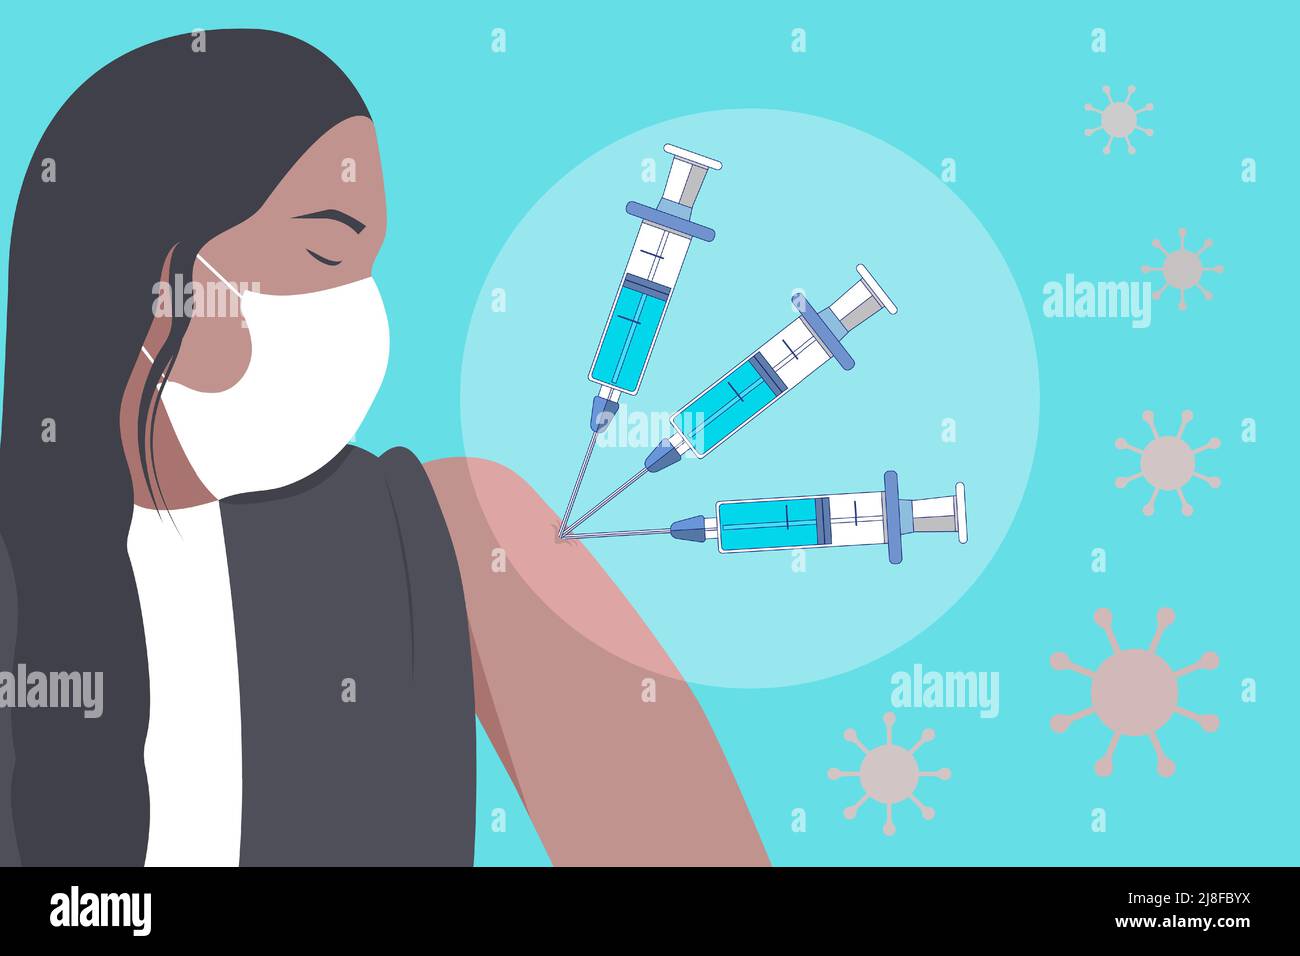 Get a booster dose of the COVID-19 vaccine. Coronavirus vaccination illustration. COVID-19 vaccine concept. A girl in a disposable medical mask, 3 syr Stock Vector